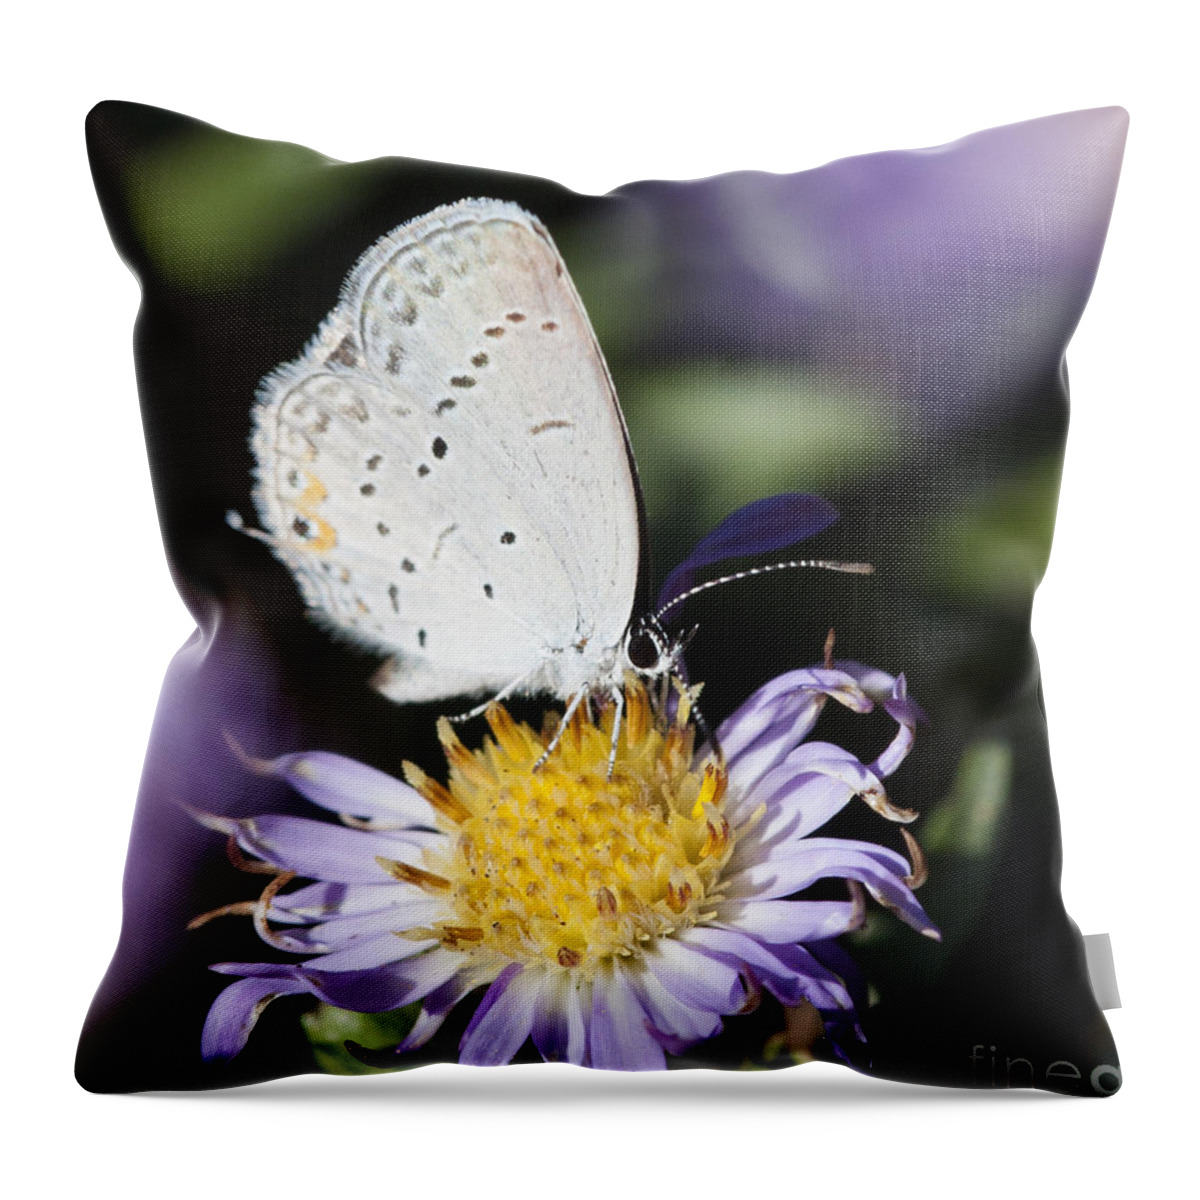 Butterfly Throw Pillow featuring the photograph White Butterfly by Chris Scroggins